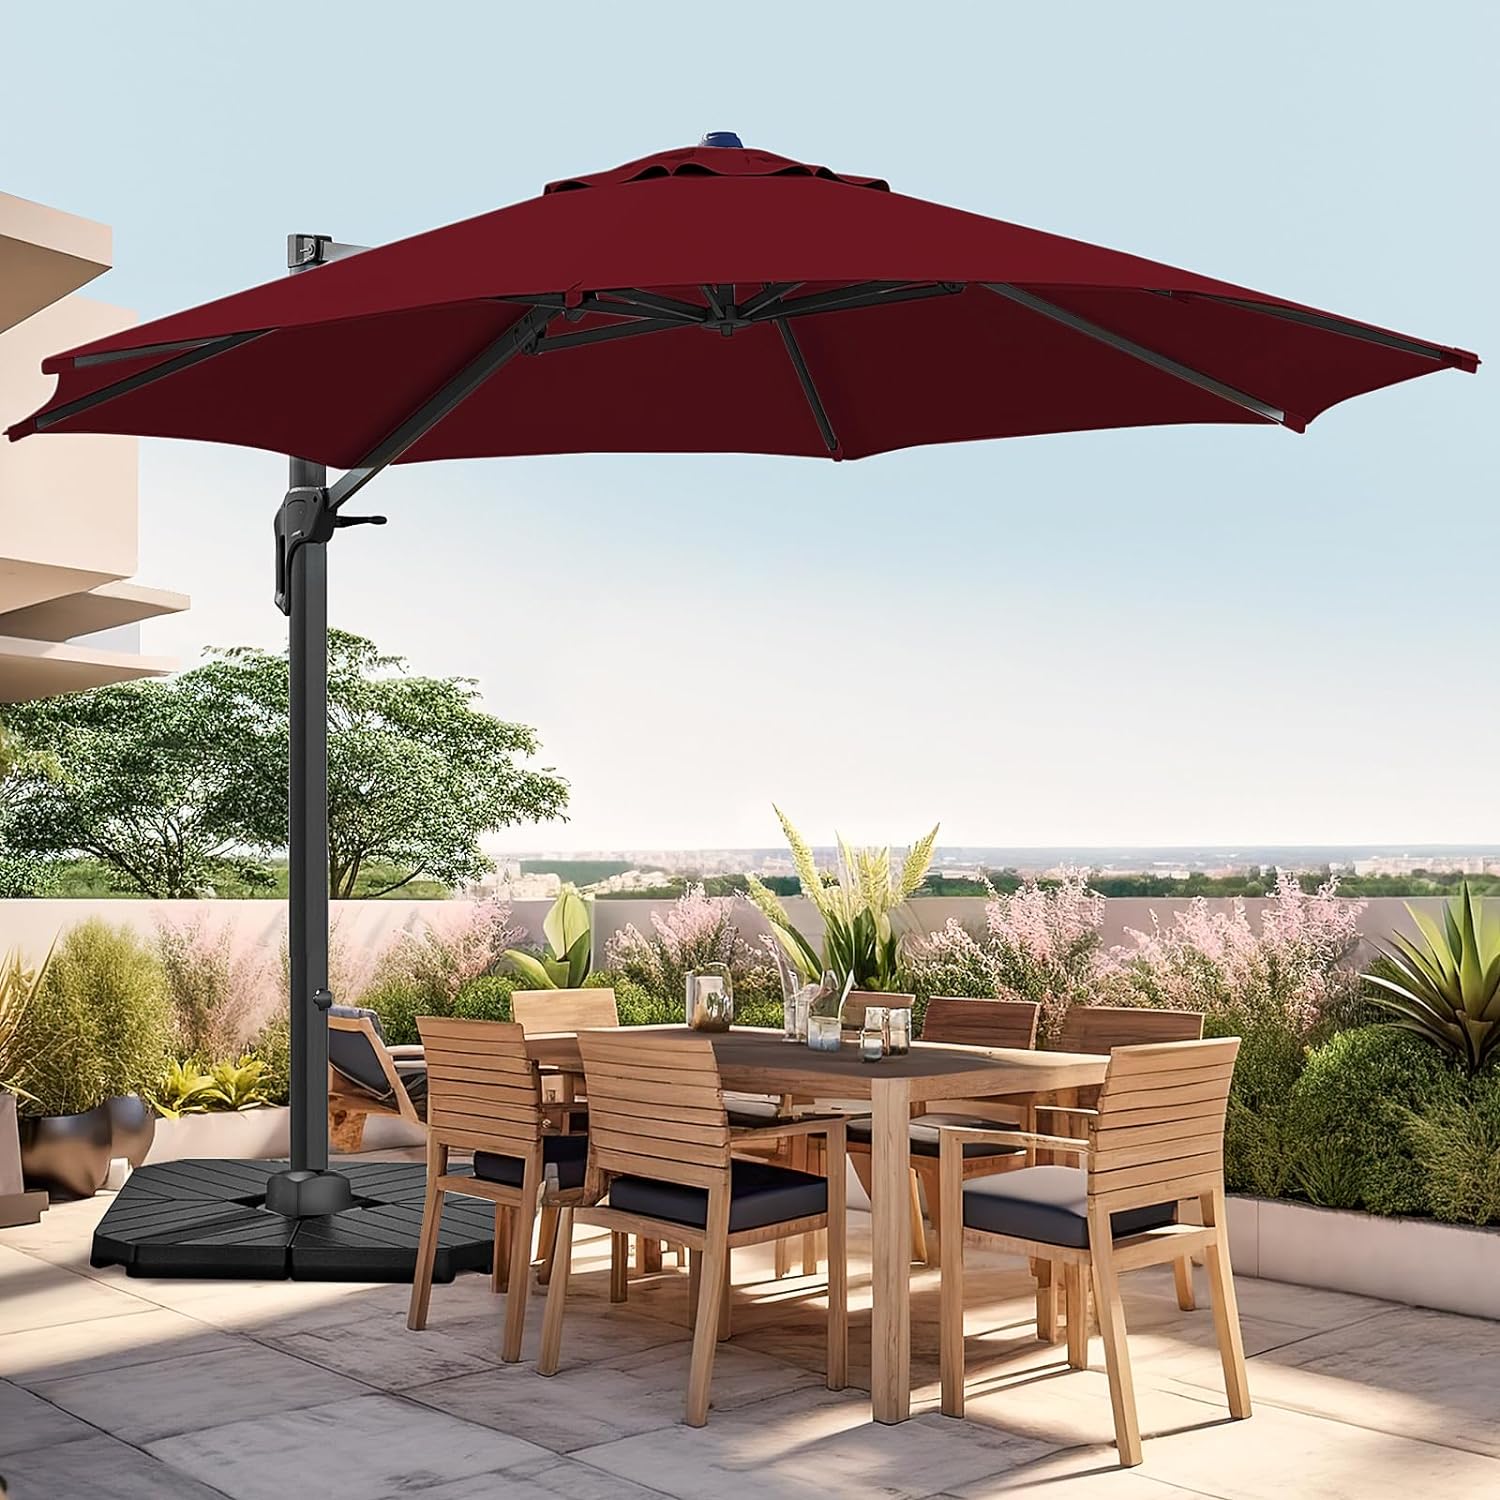 wikiwiki 12 FT Cantilever Patio Umbrellas Outdoor Large Offset Umbrella w/ 36 Month Fade Resistance Recycled Fabric, 6-Level 360 Rotation Aluminum Pole for Deck Pool Garden, Wine Red